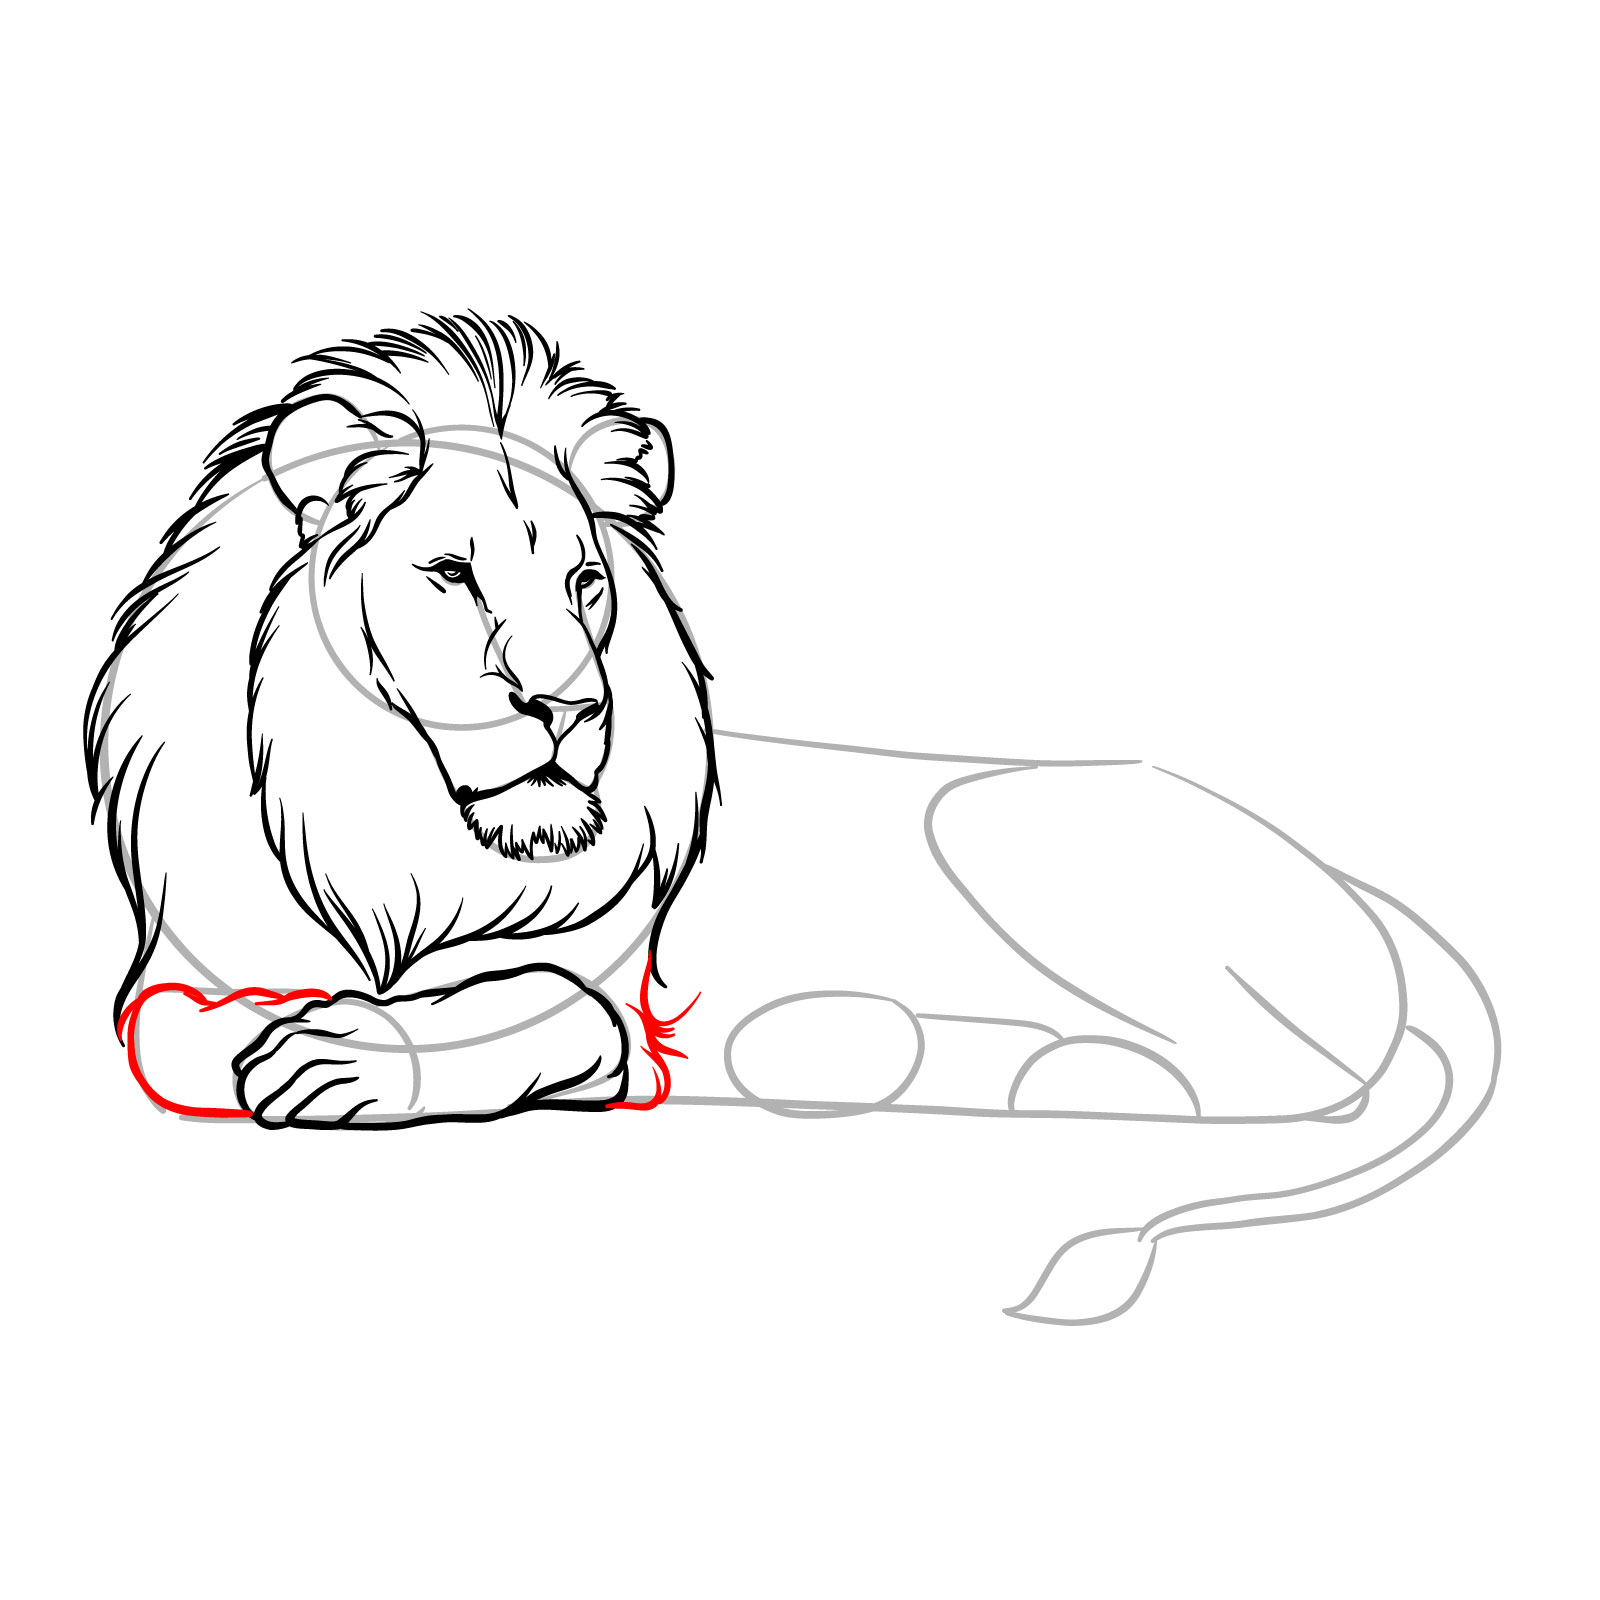 Lying lion drawing - Step 10: Sketching the second front leg